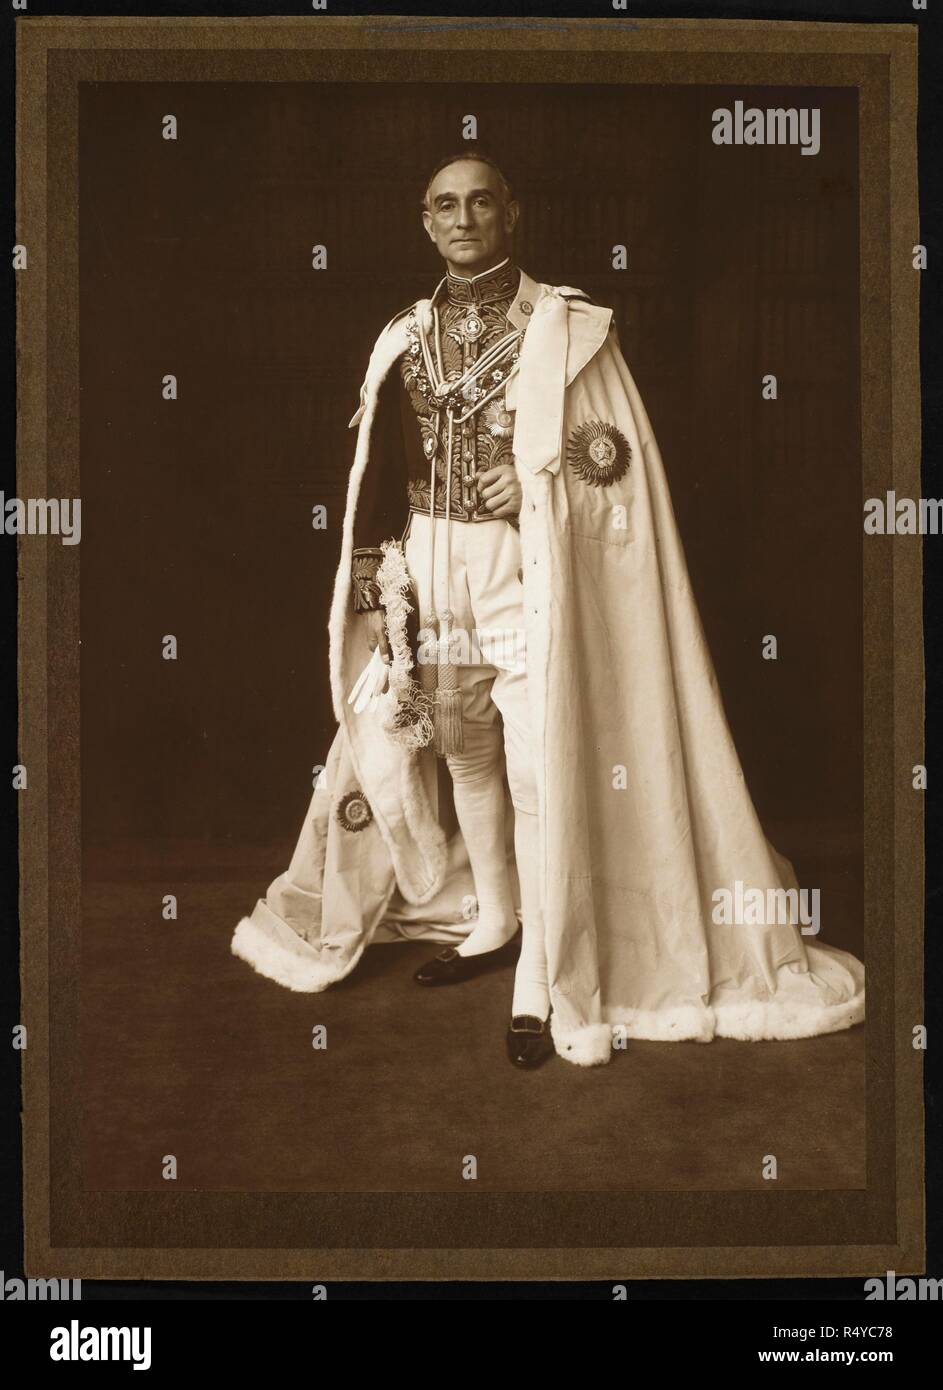 Portrait of Lord Reading in viceregal robes. Rufus Isaacs, 1st Marquess of Reading, GCB, GCSI, GCIE, GCVO, PC, KC (1860 â€“ 1935), was an English lawyer, jurist and politician. c.1922. Rufus Daniel Issacs, Ist Marquess of Reading. Photographic portrait. Source: Photo 10/24.(59). Author: ANON. Stock Photo